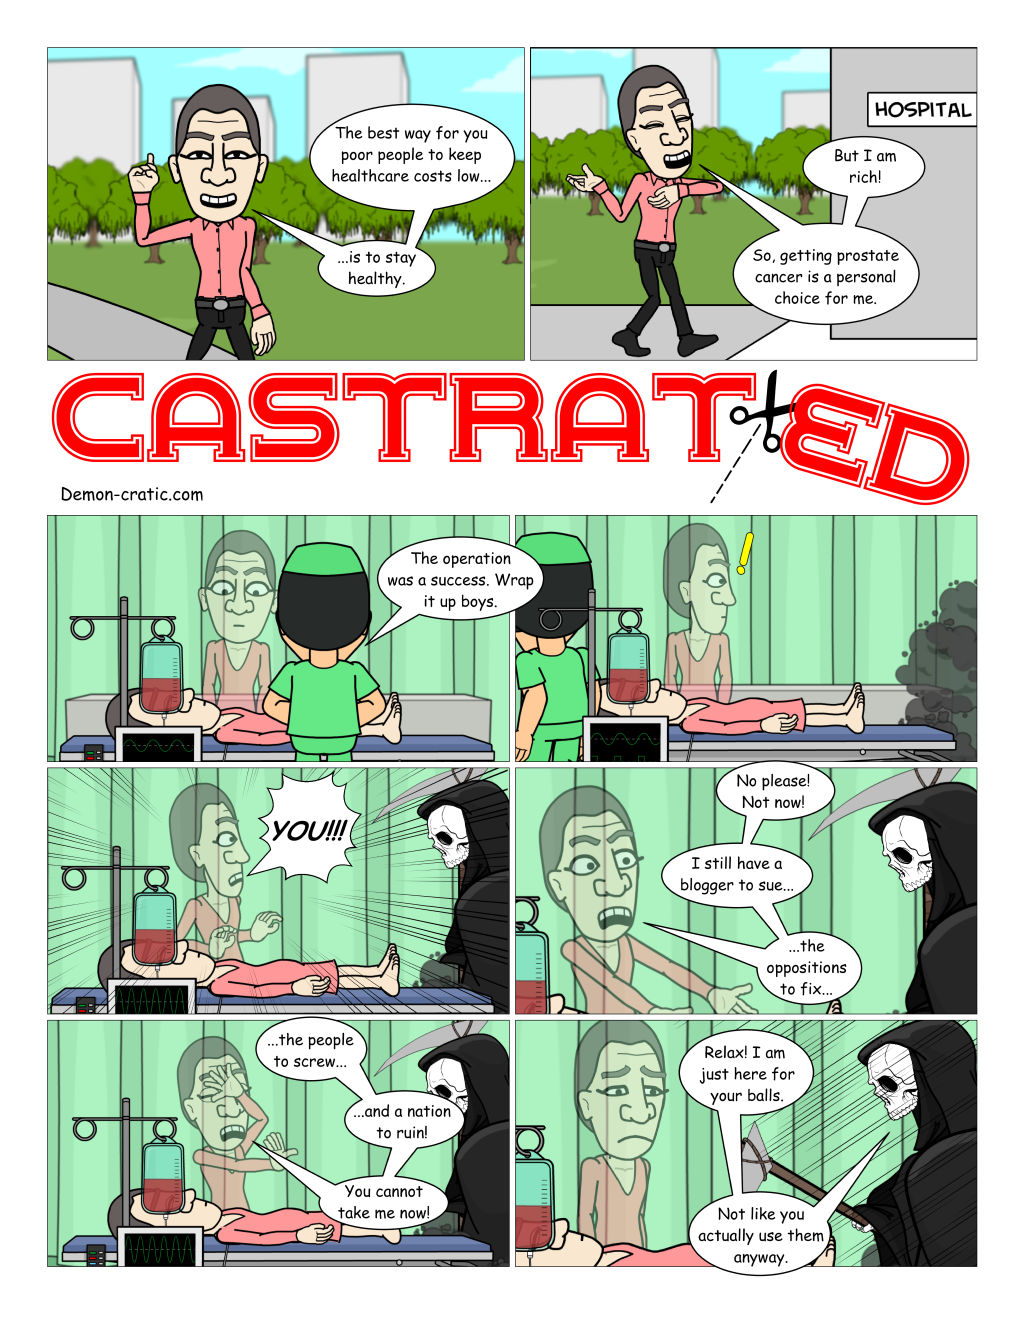 Castrated - Demon-cratic